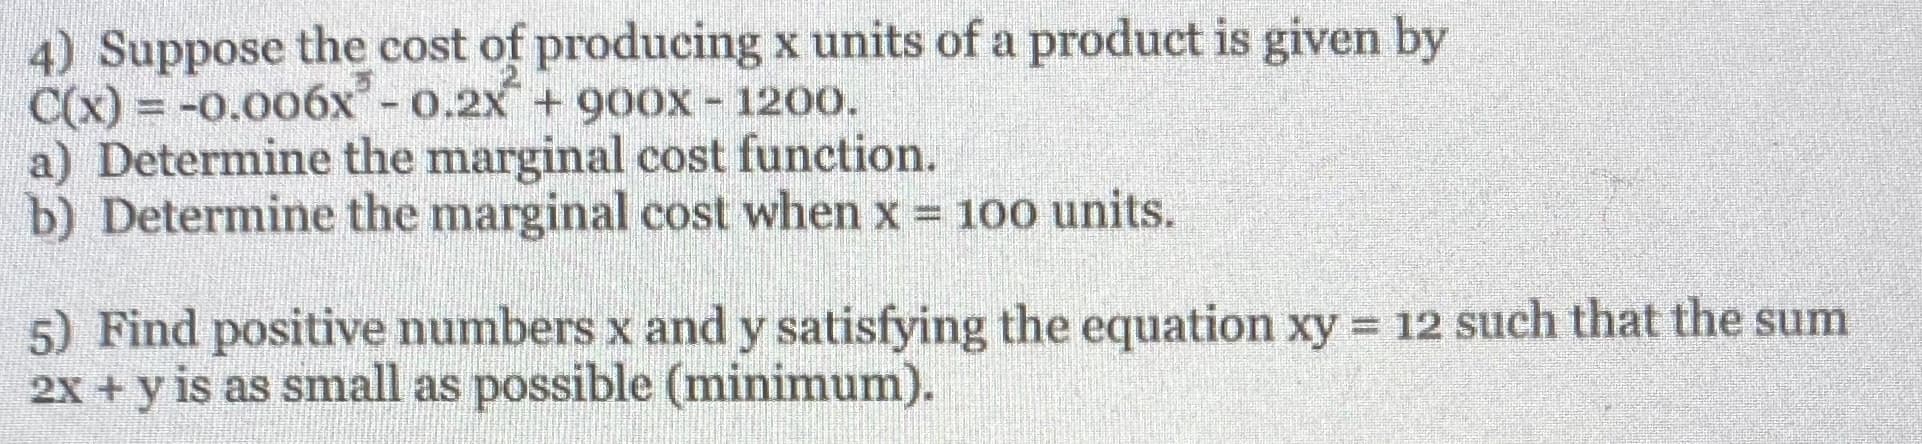 4) Suppose the cost of producing x units of a product is given by
C(x) = -0.006x- 0.2X + 9Oox - 1200.
a) Determine the marginal cost function.
b) Determine the marginal cost when x = 100 units.
5) Find positive numbers x and y satisfying the equation xy = 12 such that the sum
2x + y is as small as possible (minimum).
%3D
